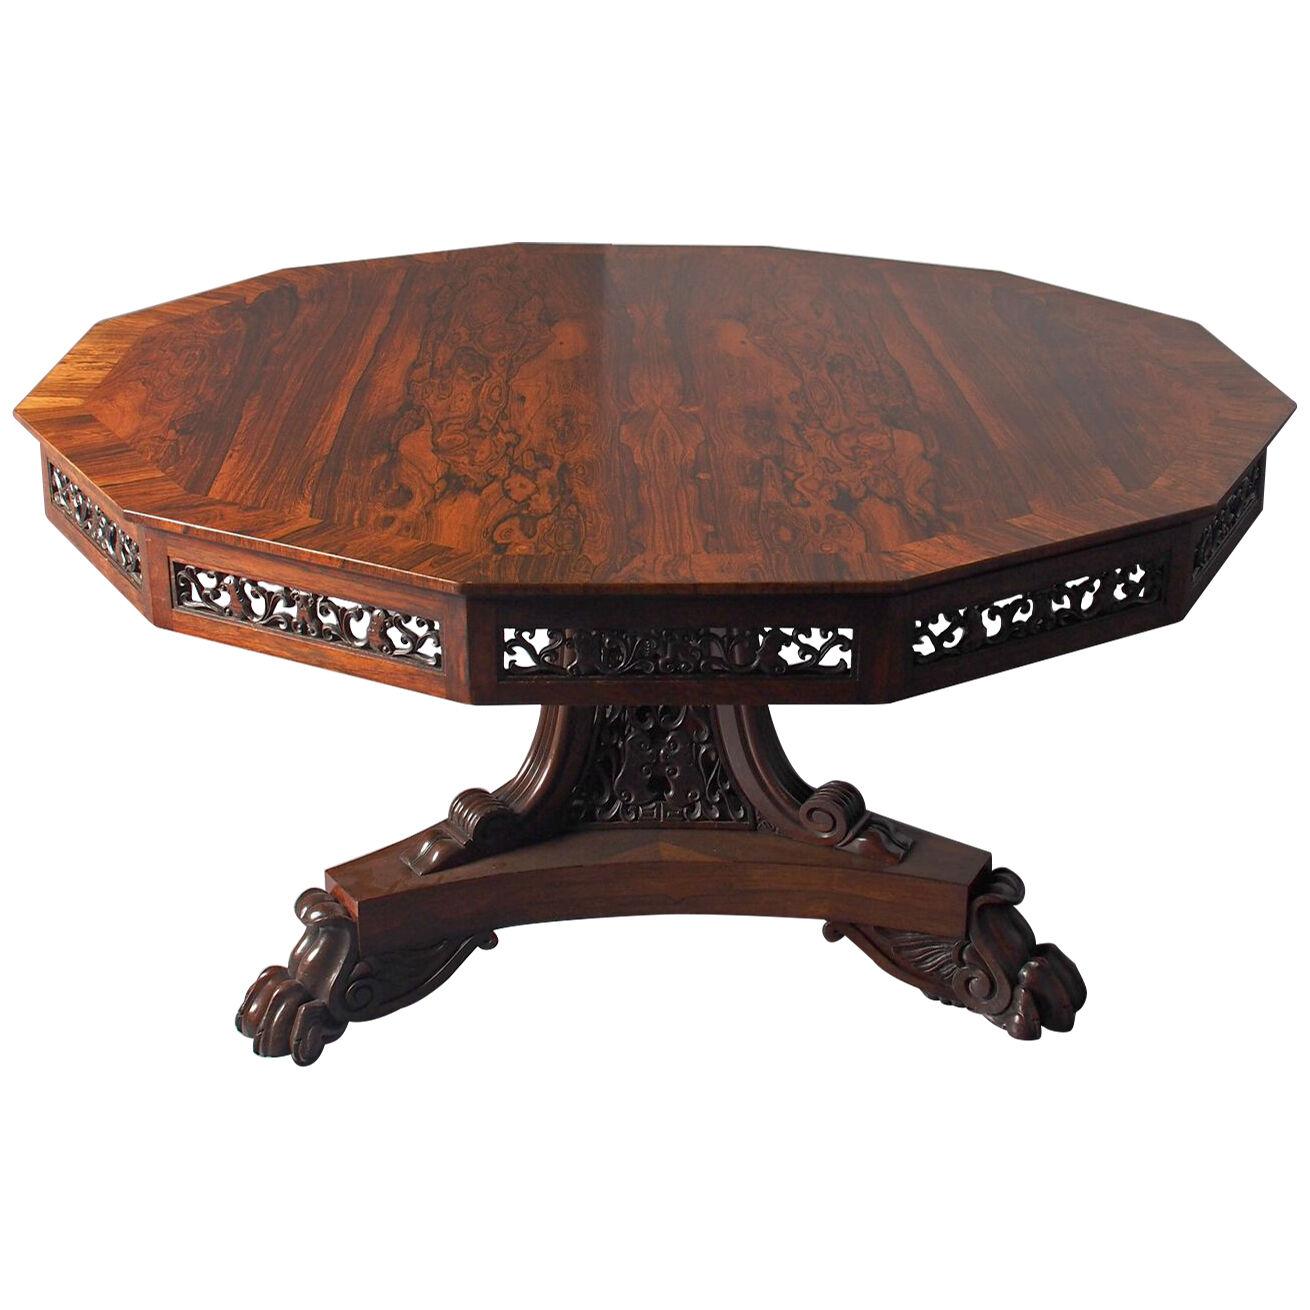 Rare George IV British Rosewood Breakfast Table with Chinese Panels